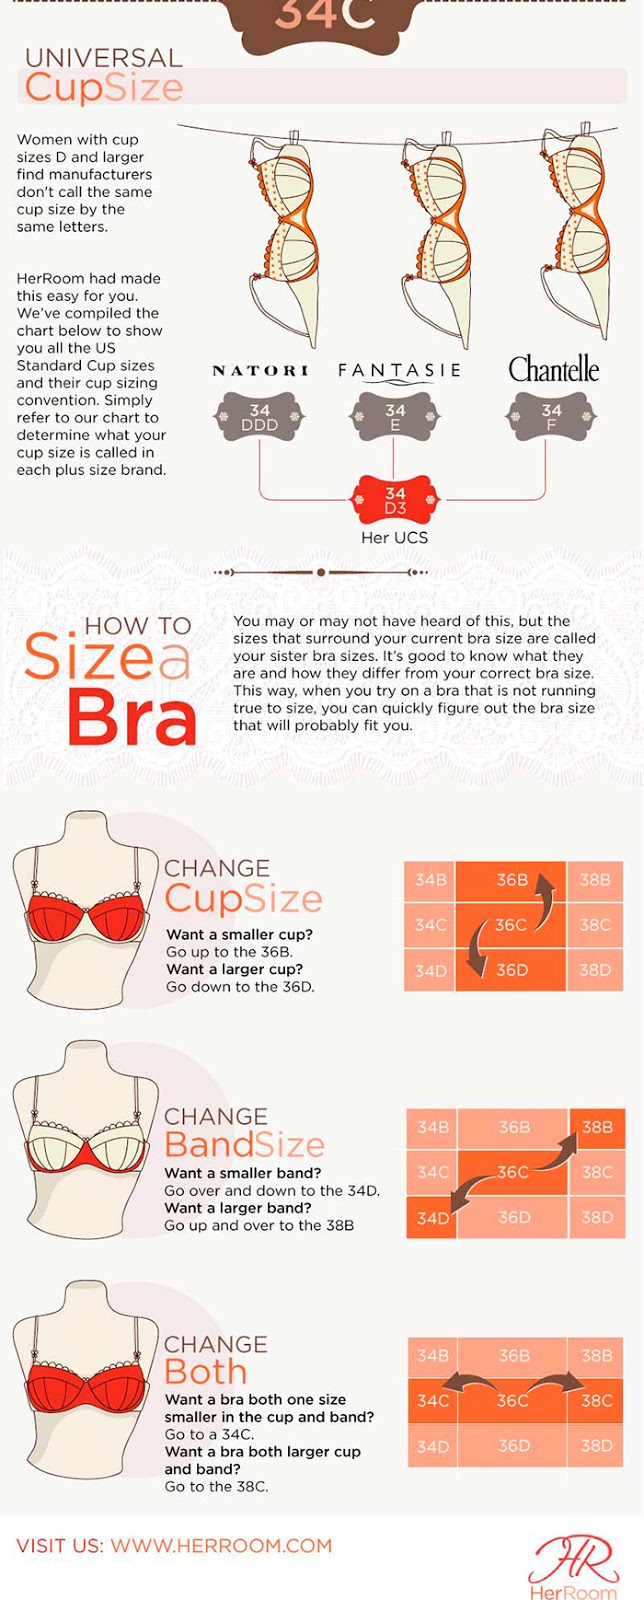 See Here: Know the "Sister Bra Sizes" to Quickly Find a Bra That Fits